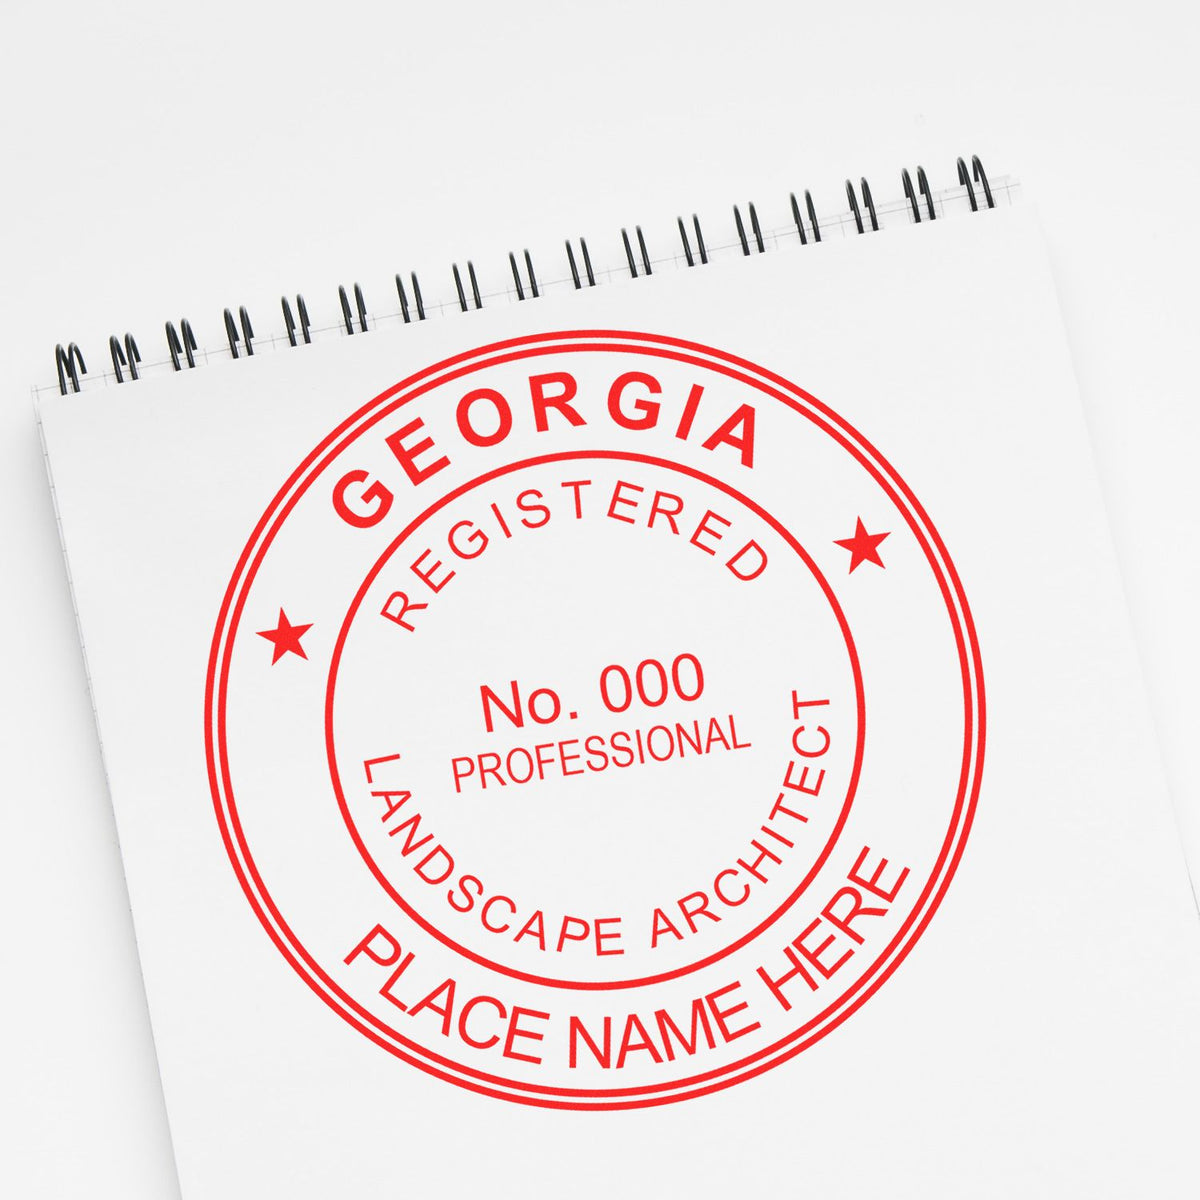 A photograph of the Digital Georgia Landscape Architect Stamp stamp impression reveals a vivid, professional image of the on paper.